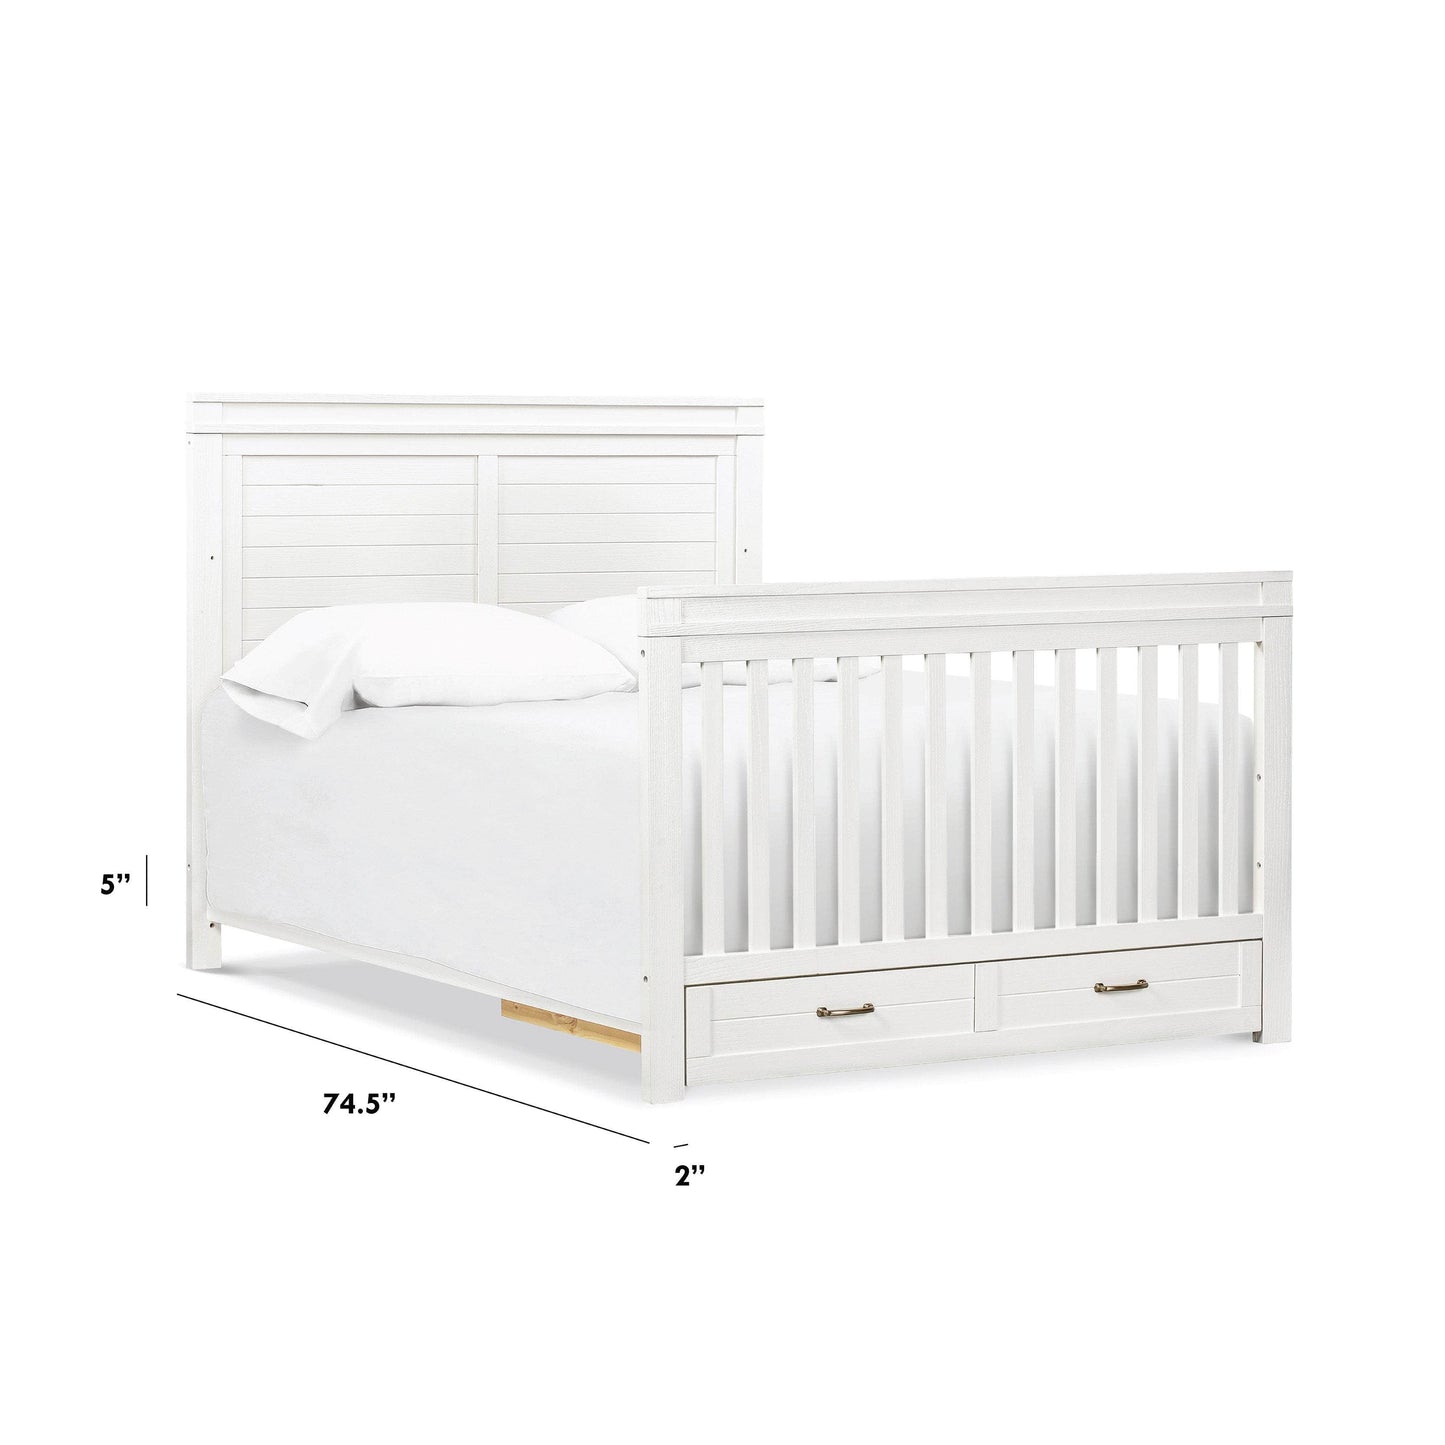 M14189HW,Full Size Bed Conversion Kit in Heirloom White